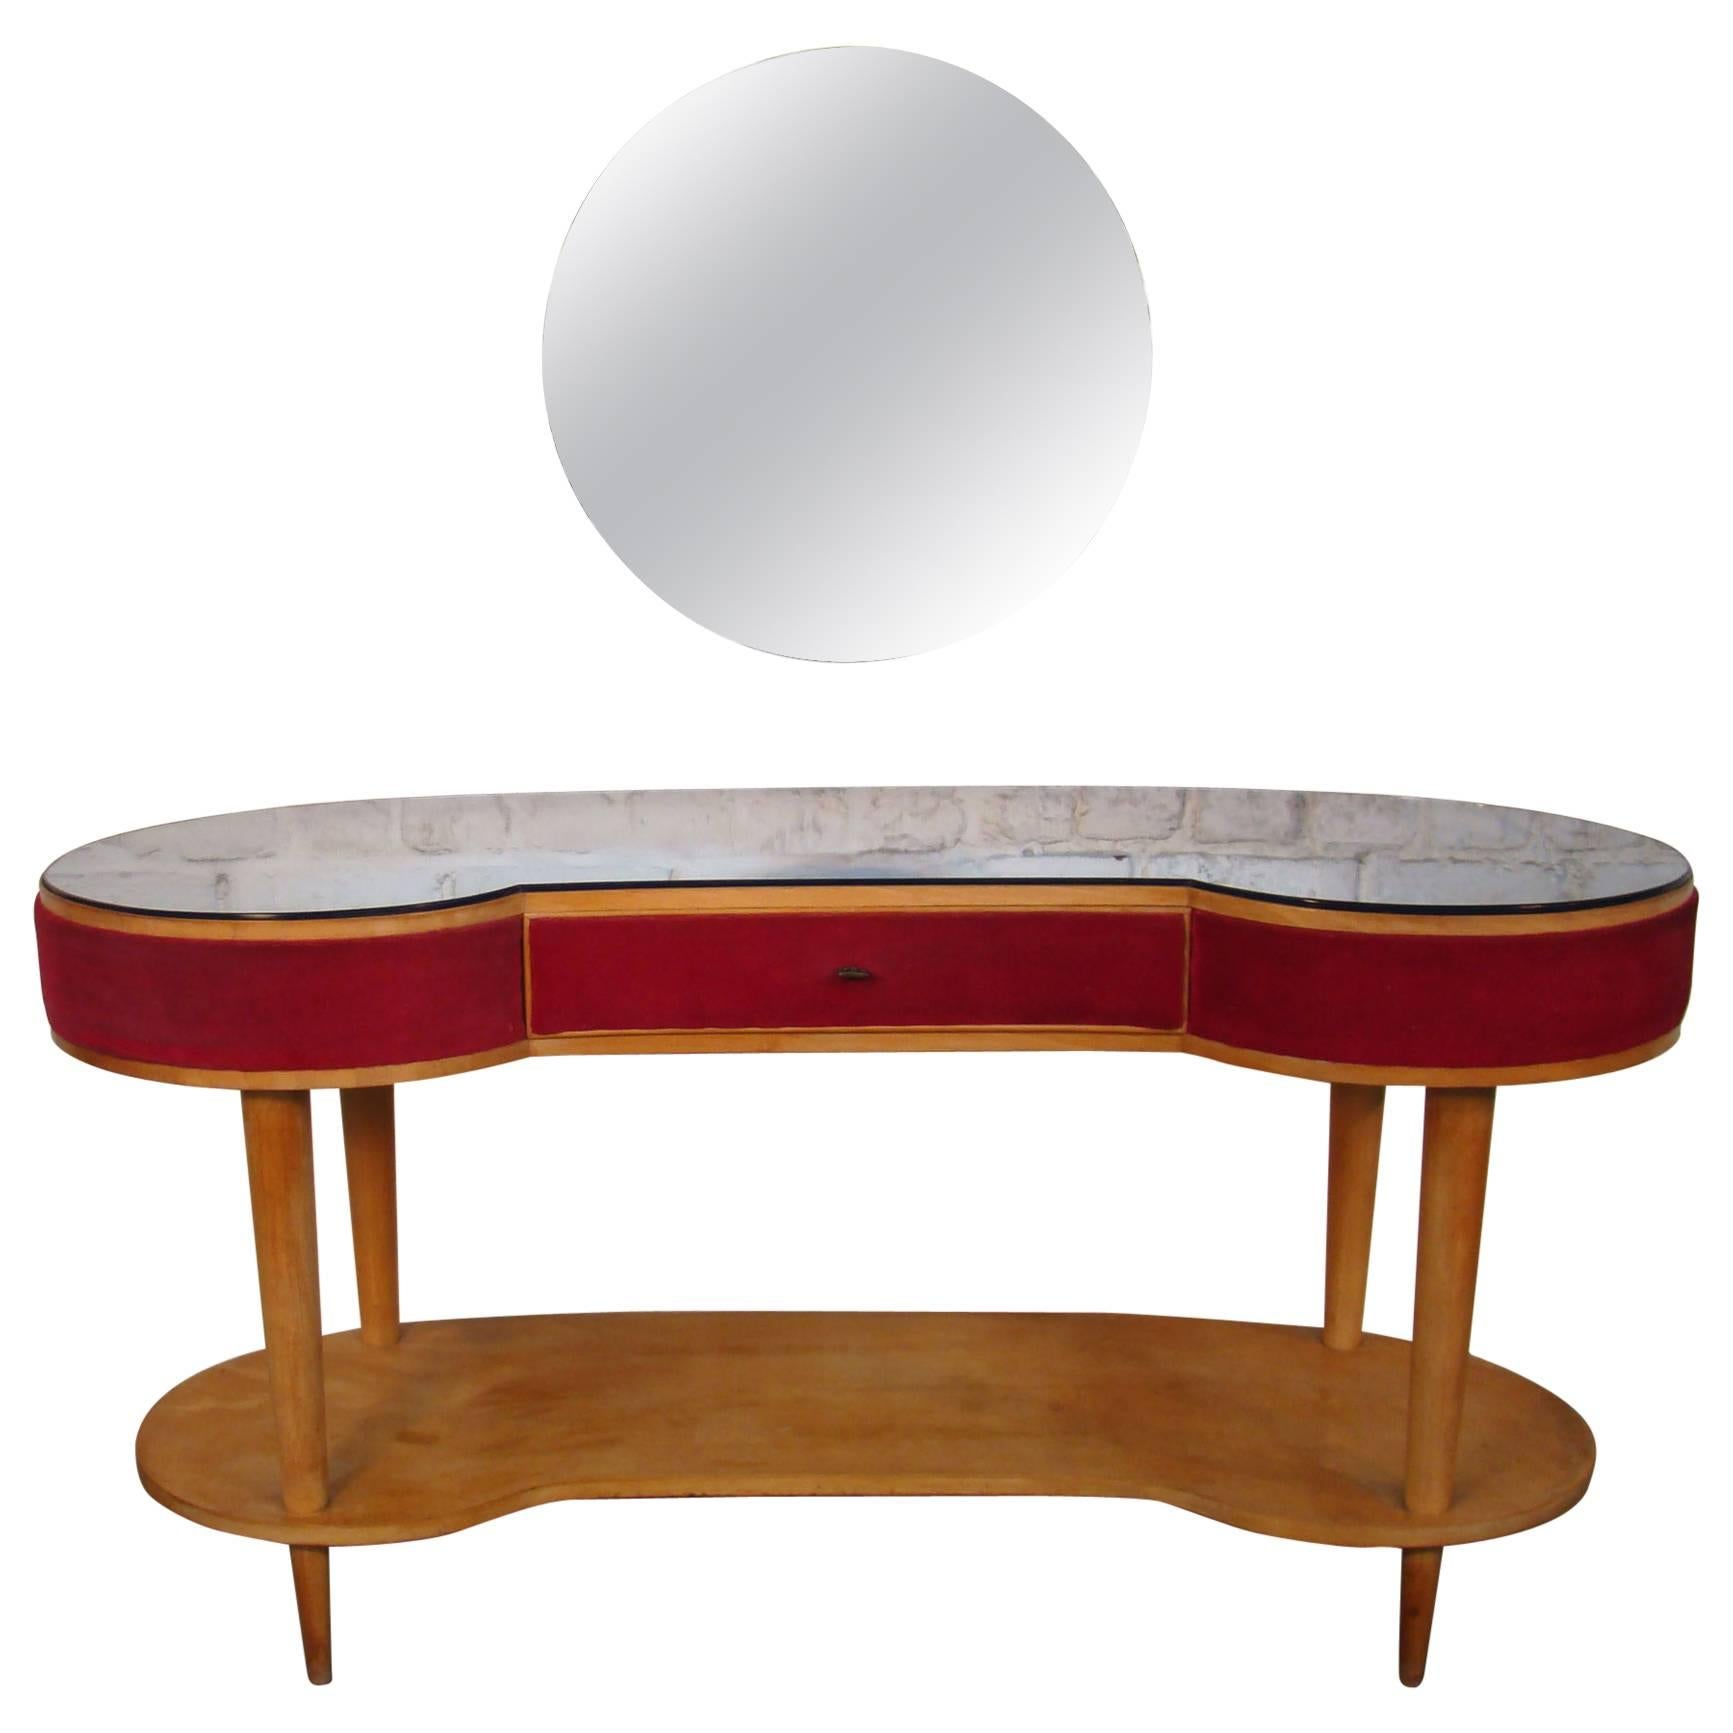 Dressing Table and Its Stool in Veneer Cherrywood and Blue-Toned Glass, Italy